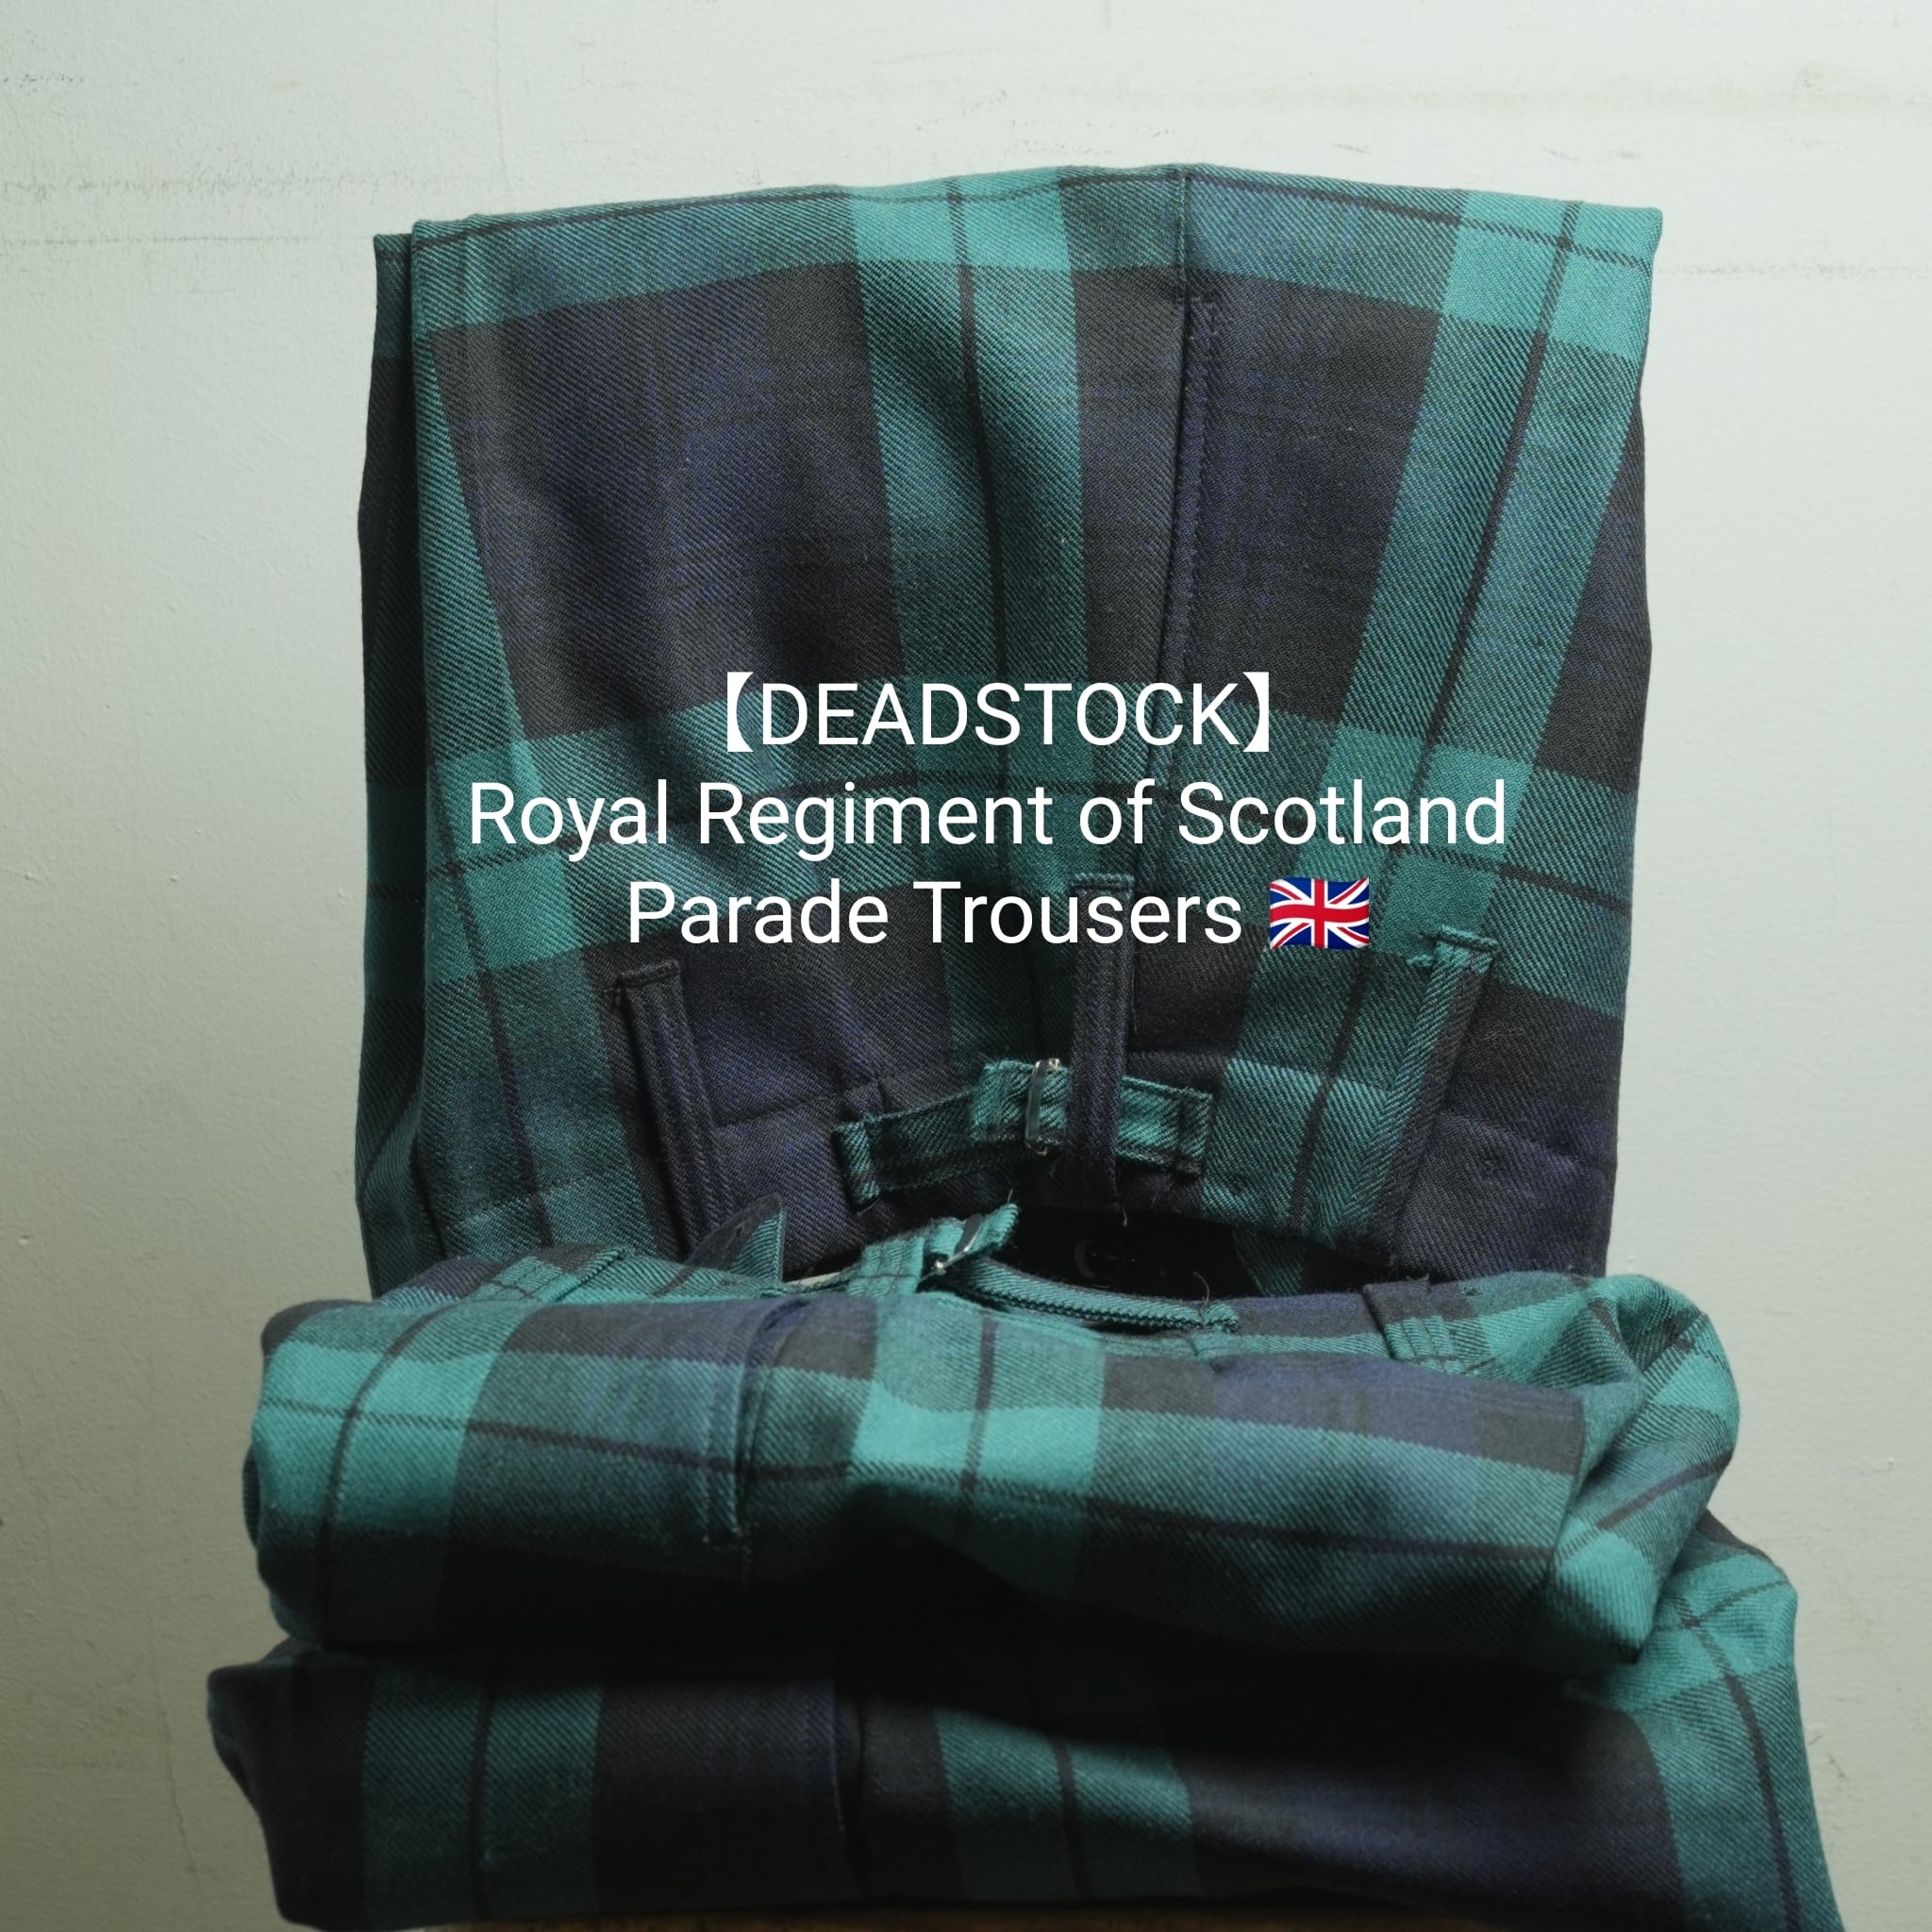 Royal Regiment of Scotland Parade Trousers 【DEADSTOCK】 | AMICI used vintage  clothing store powered by BASE